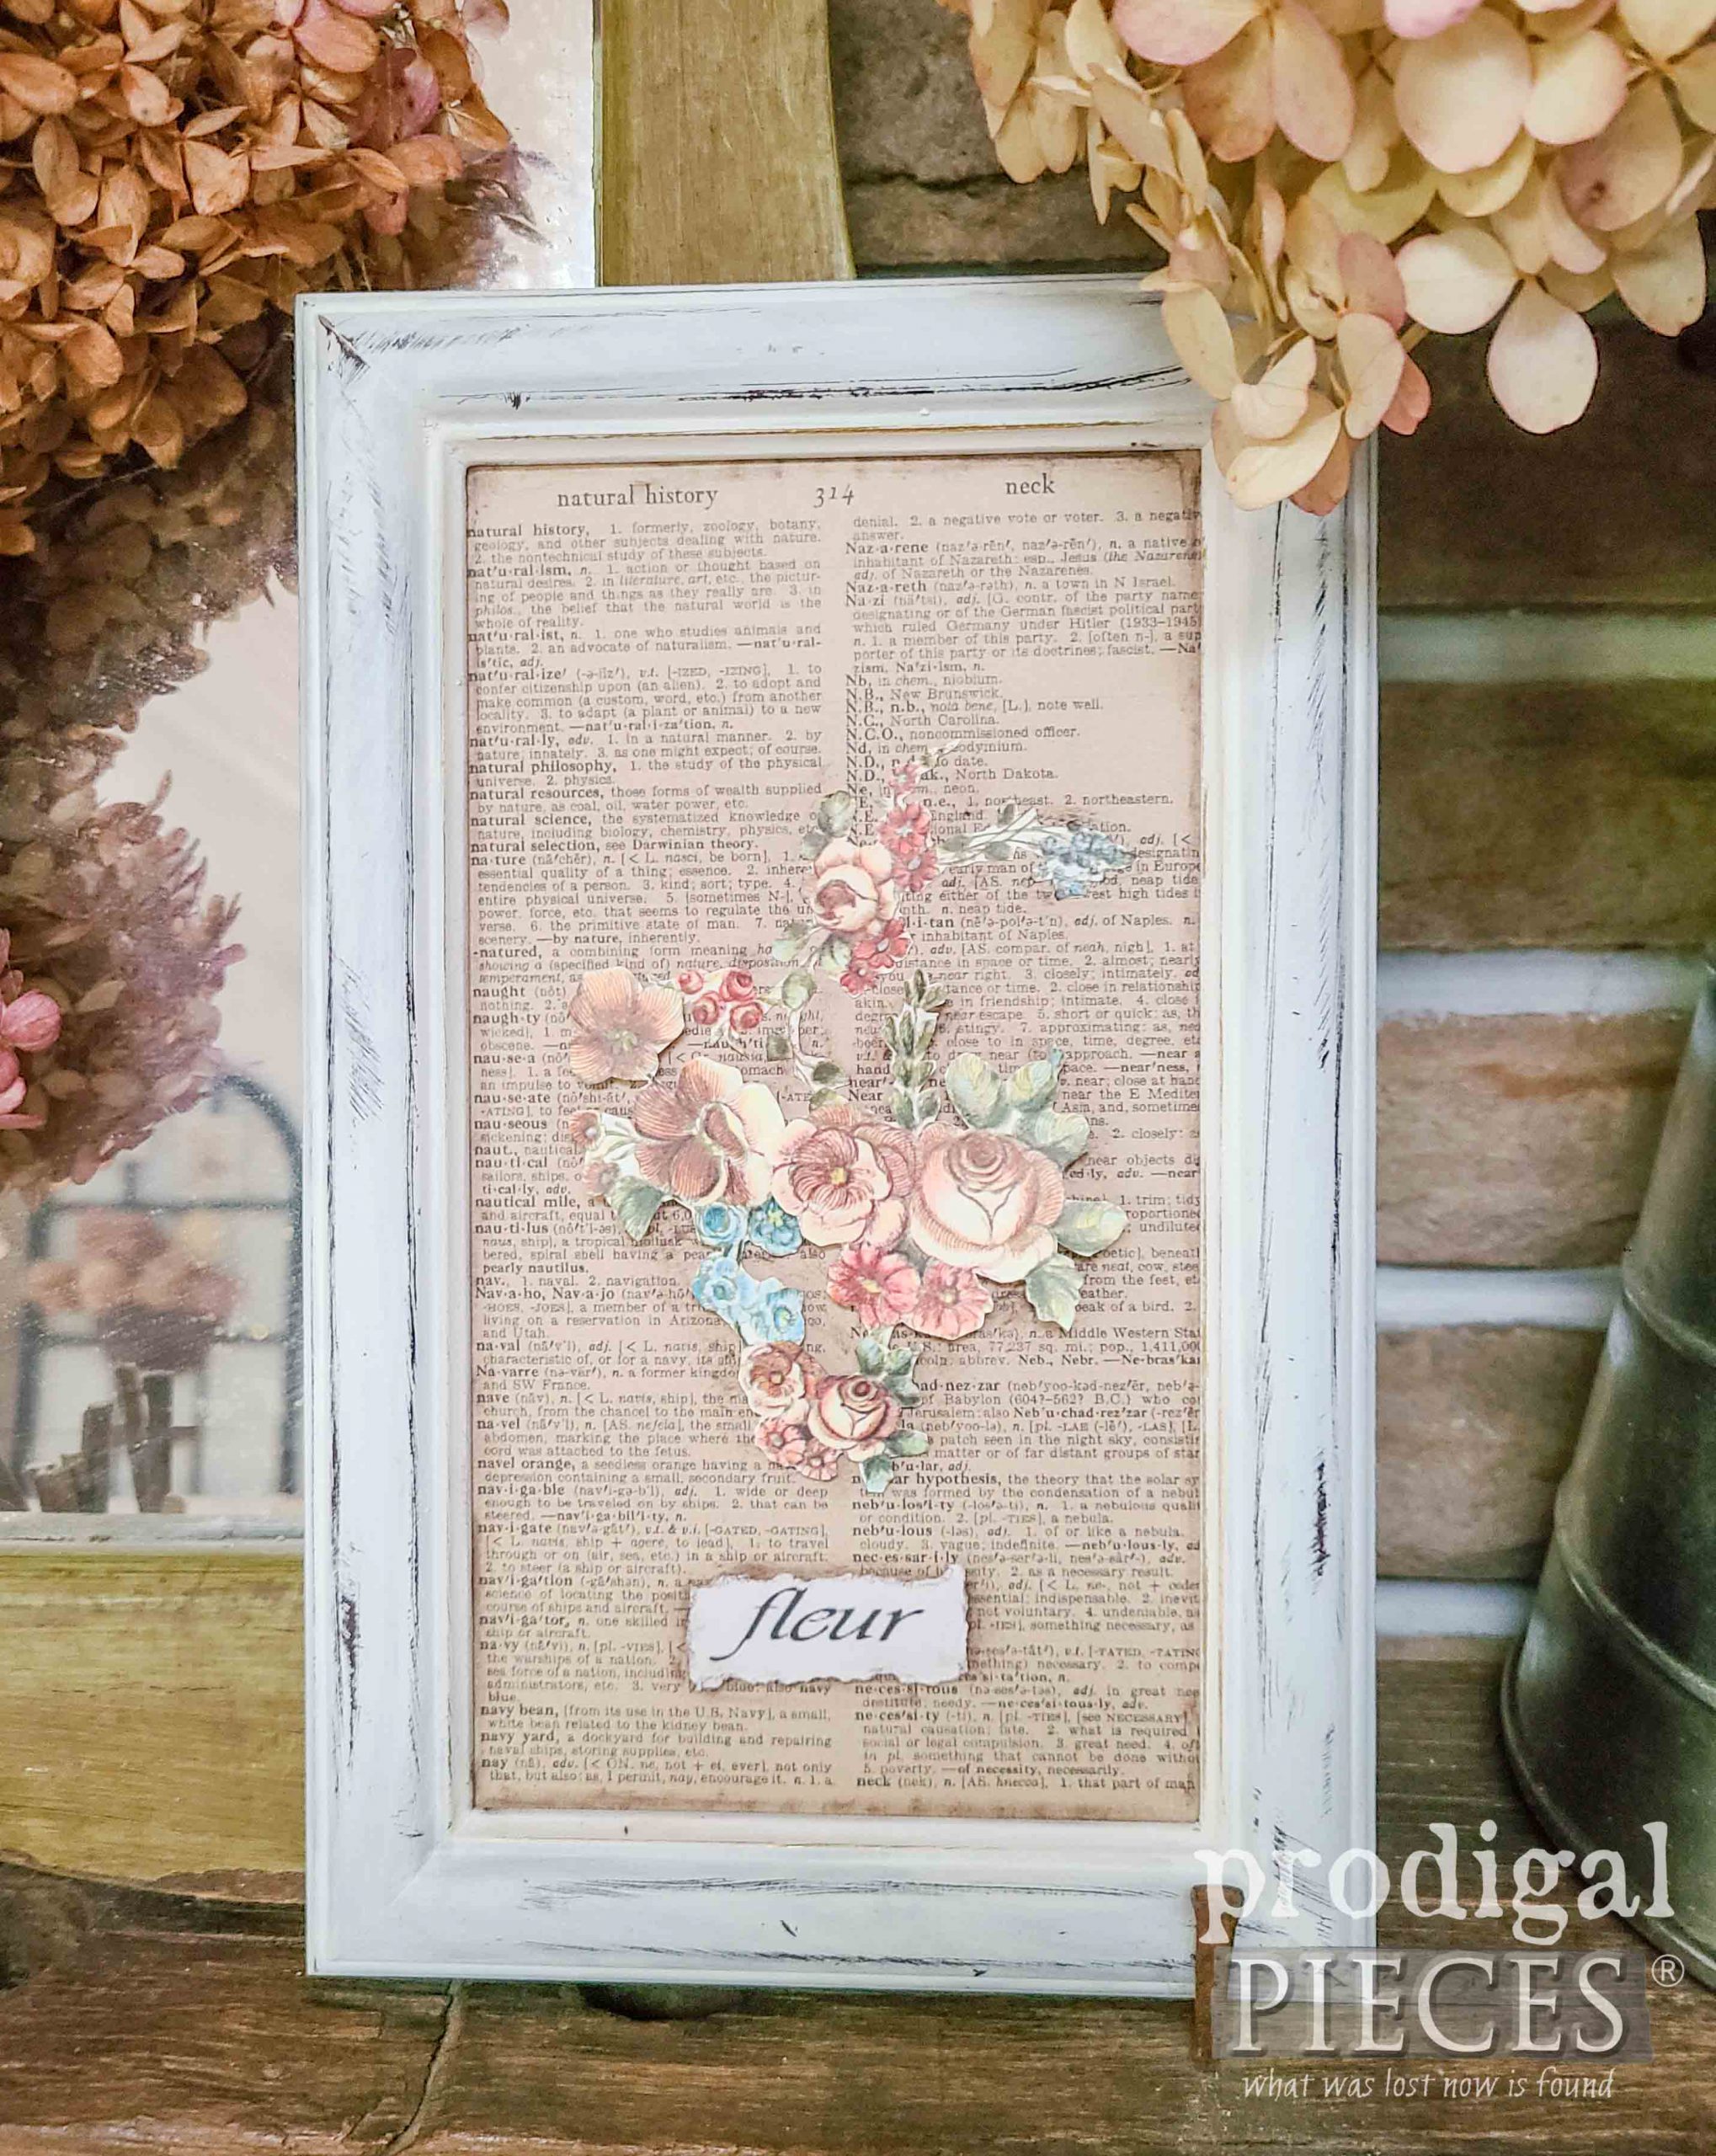 French Fleur Art with DIY Thrift Store Frames by Larissa of Prodigal Pieces | prodigalpieces.com #prodigalpieces #french #diy #home